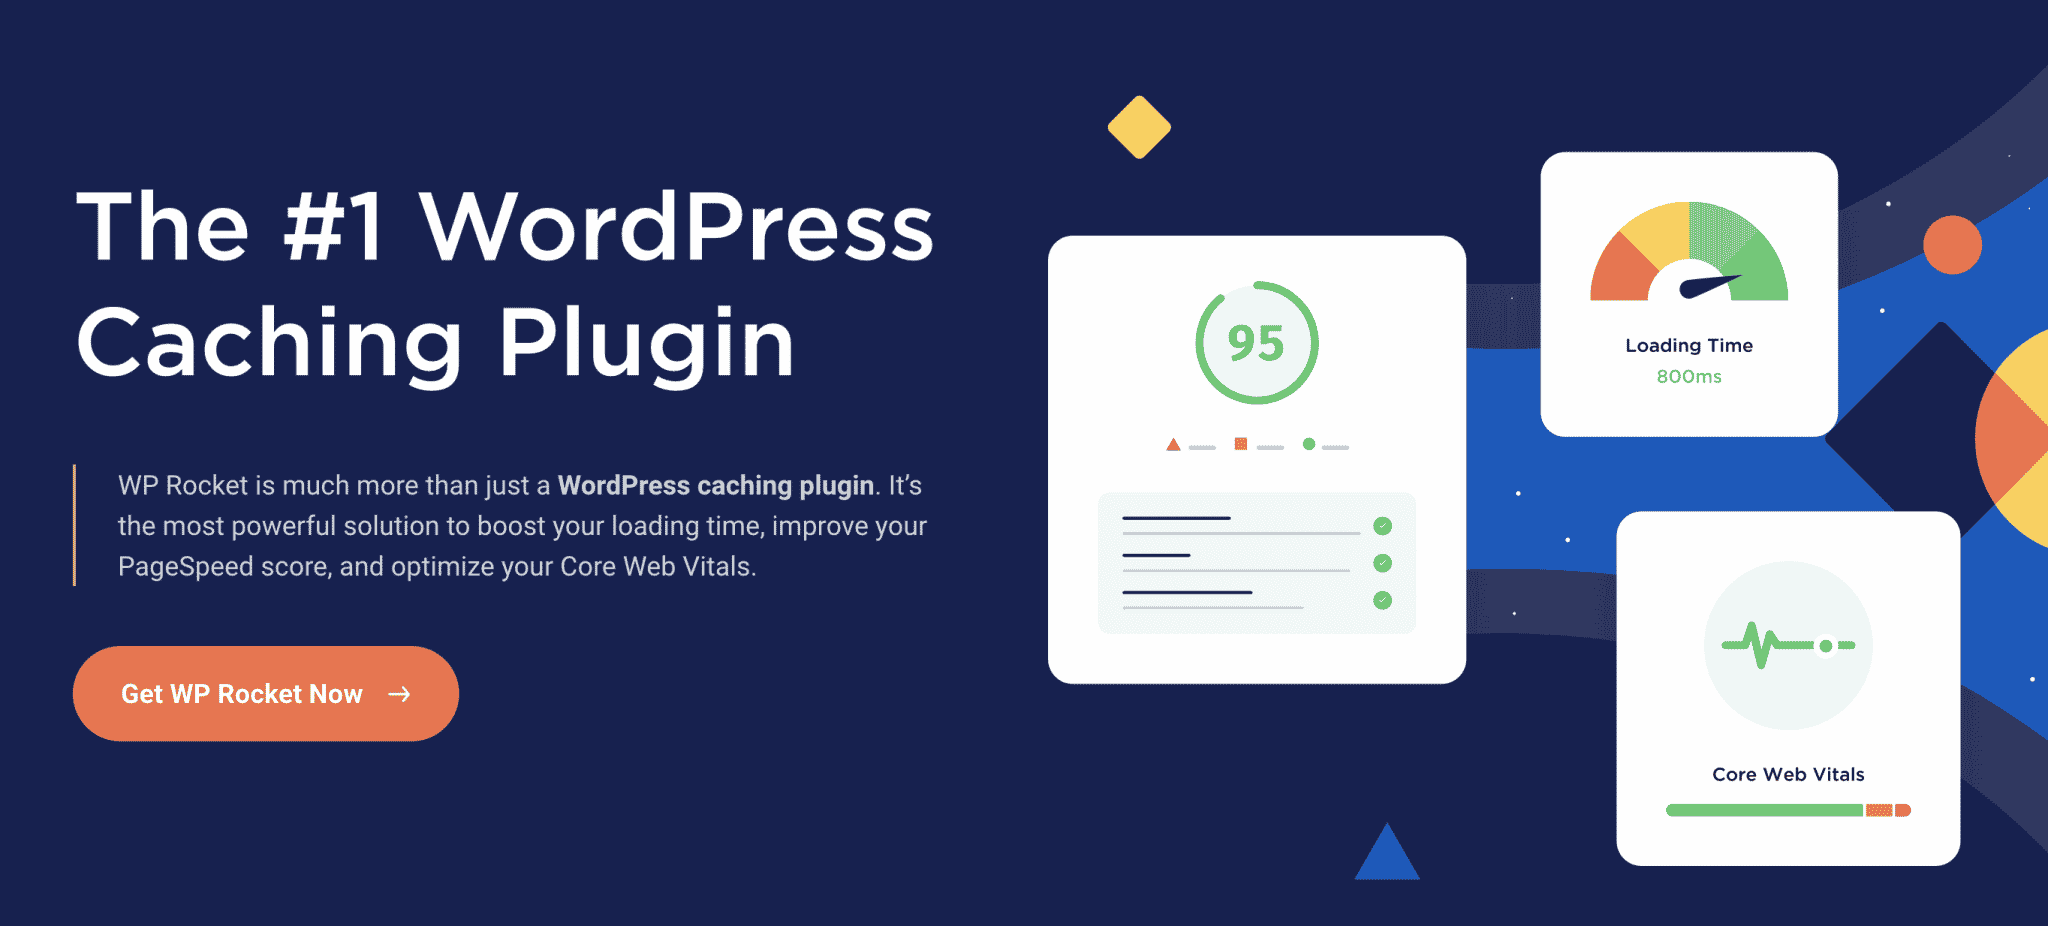 WP Rocket is a caching plugin that will allow you to optimize and speed up WordPress.